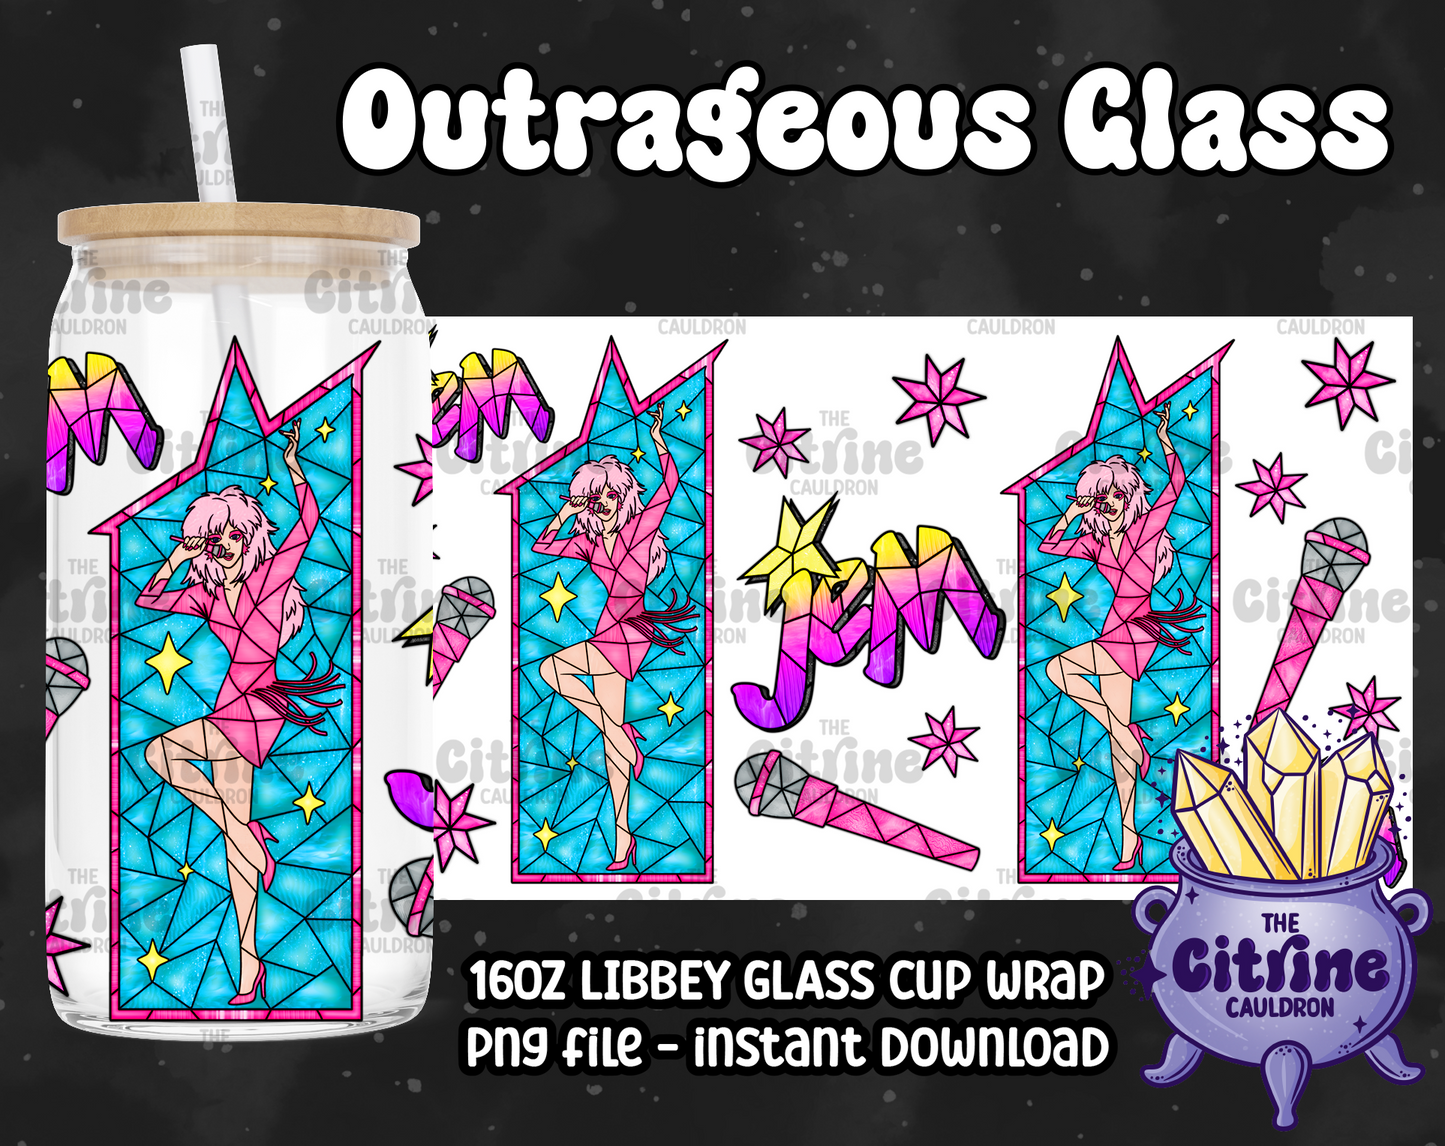 Outrageous Glass - PNG Wrap for Libbey 16oz Glass Can